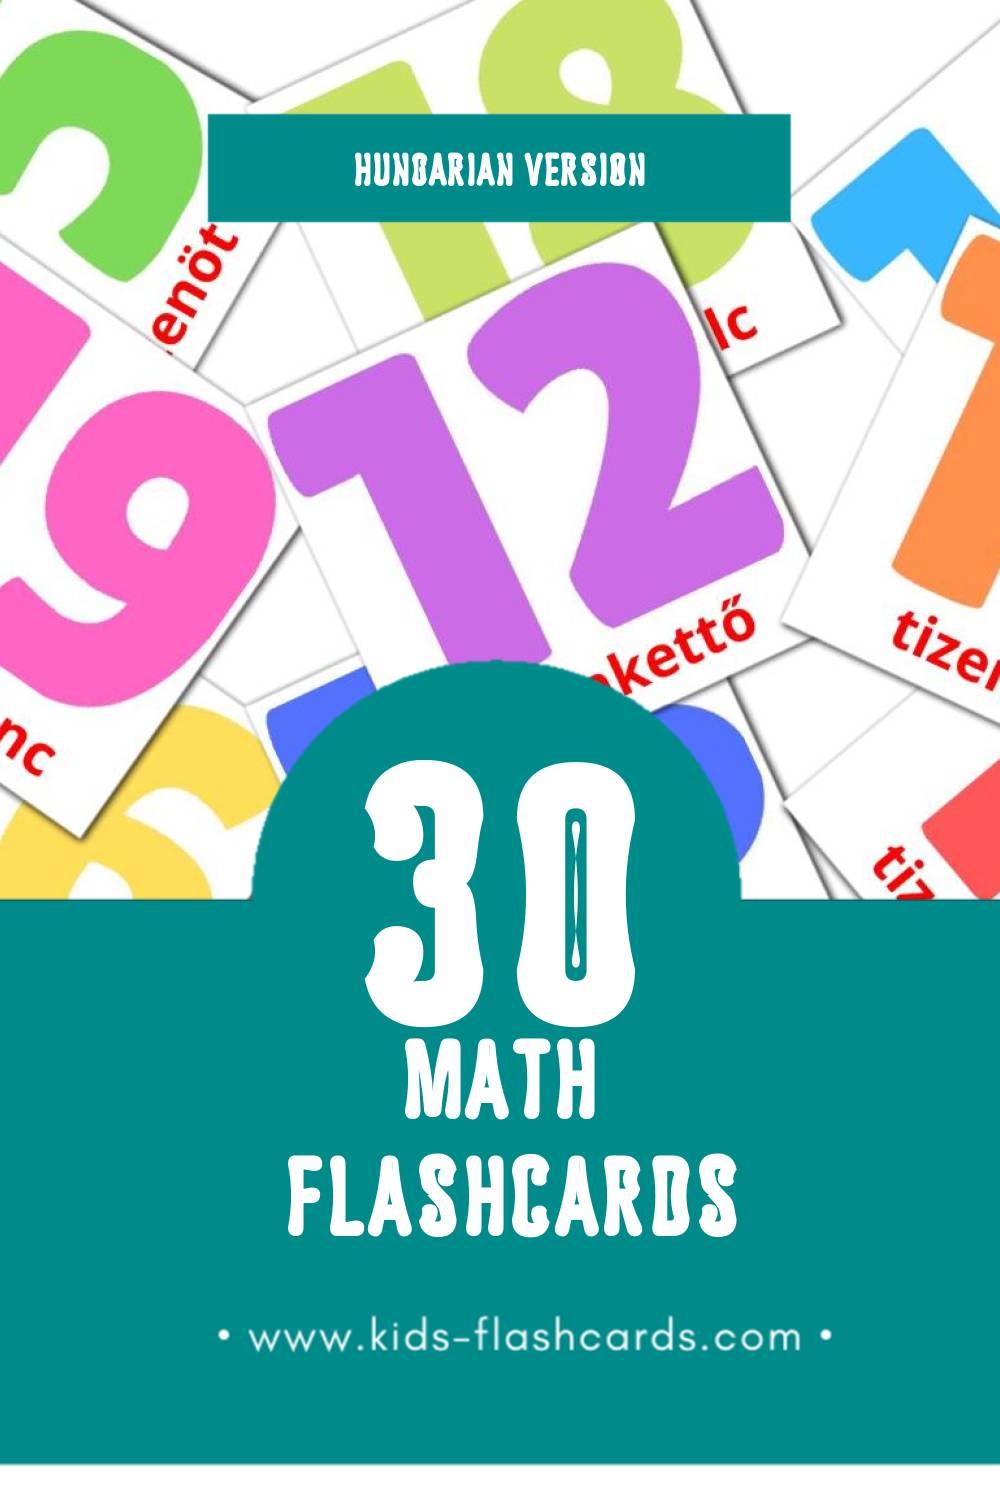 Visual Matematika Flashcards for Toddlers (30 cards in Hungarian)